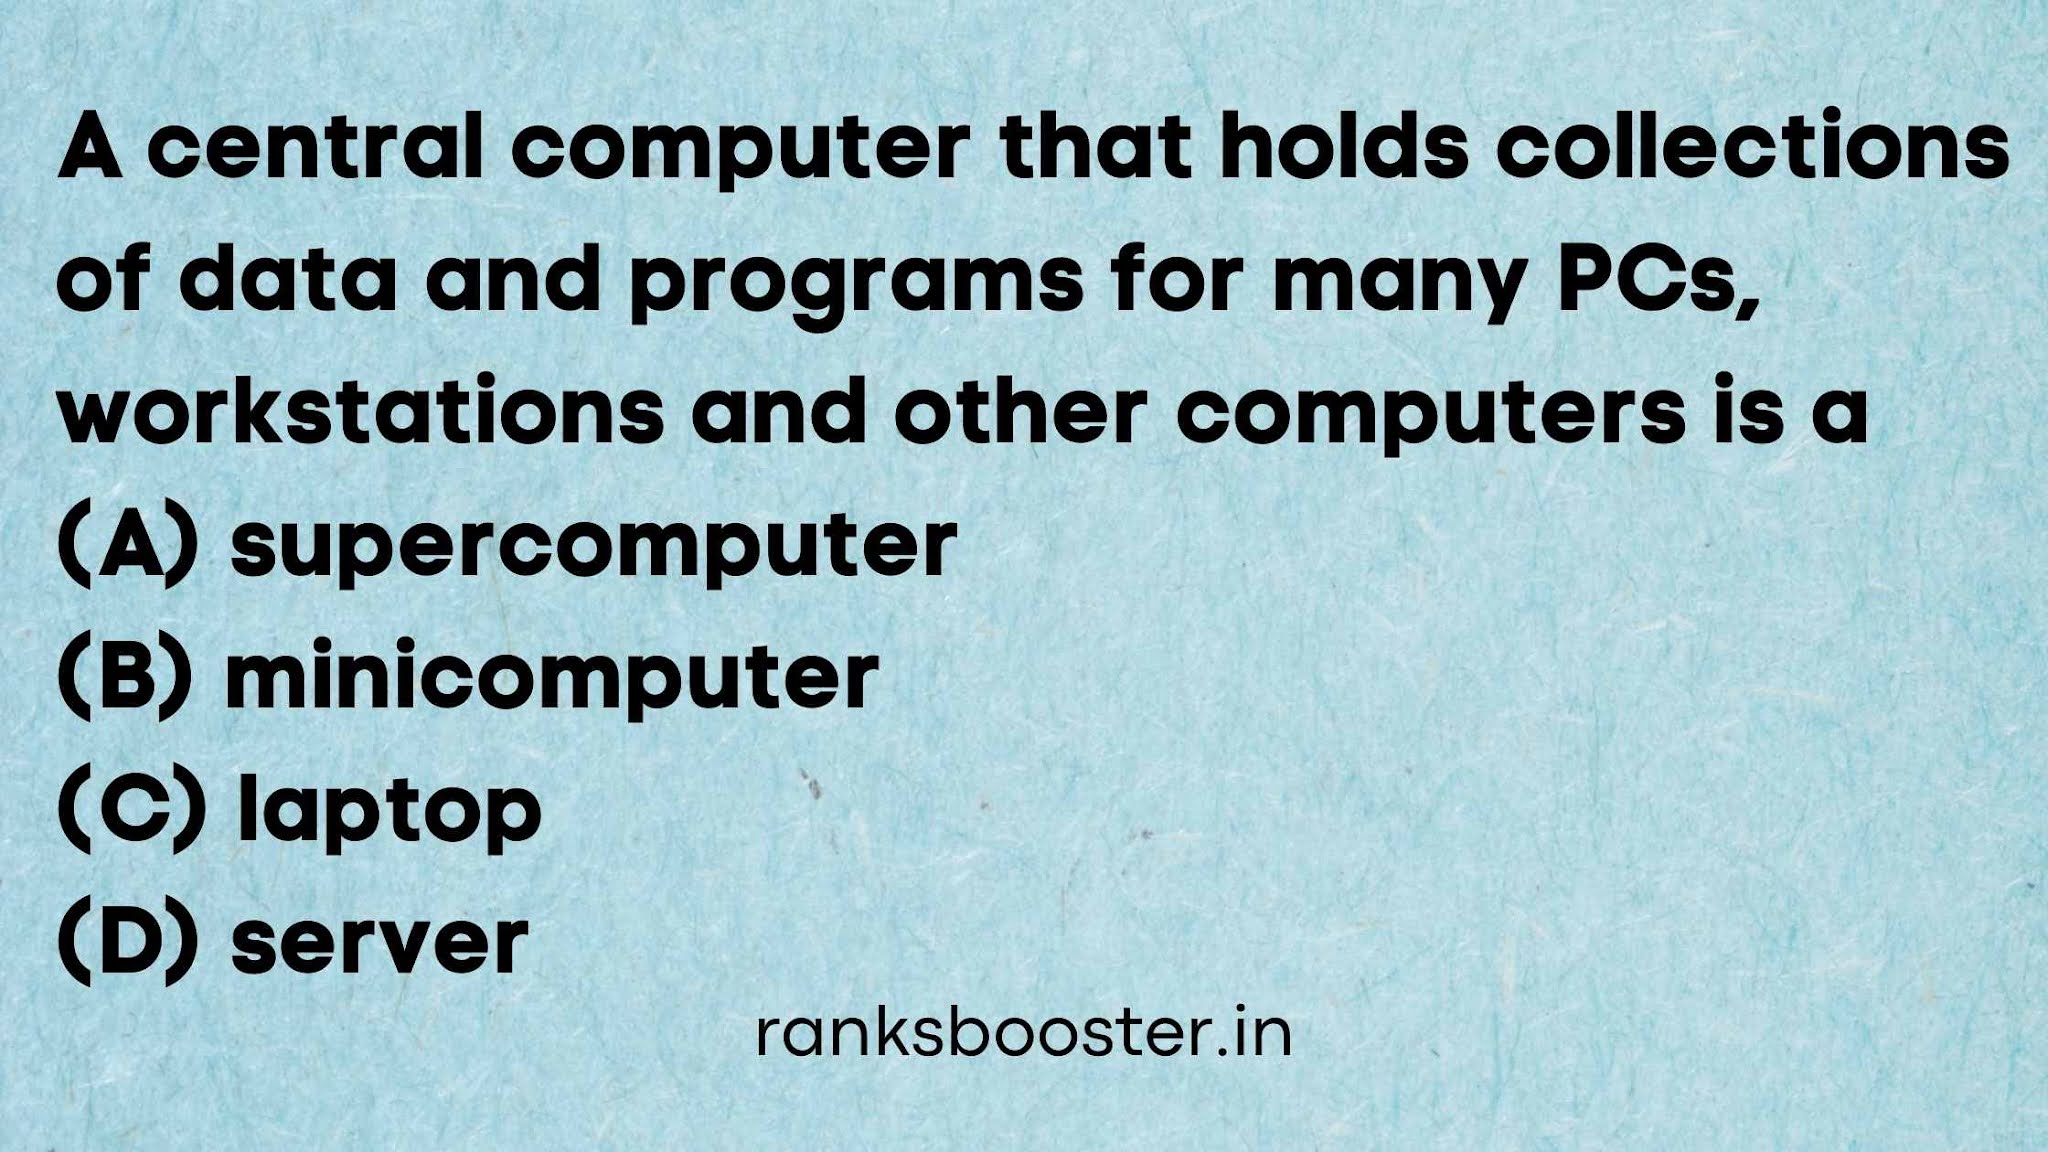 A central computer that holds collections of data and programs for many PCs, workstations and other computers is a (A) supercomputer (B) minicomputer (C) laptop (D) server